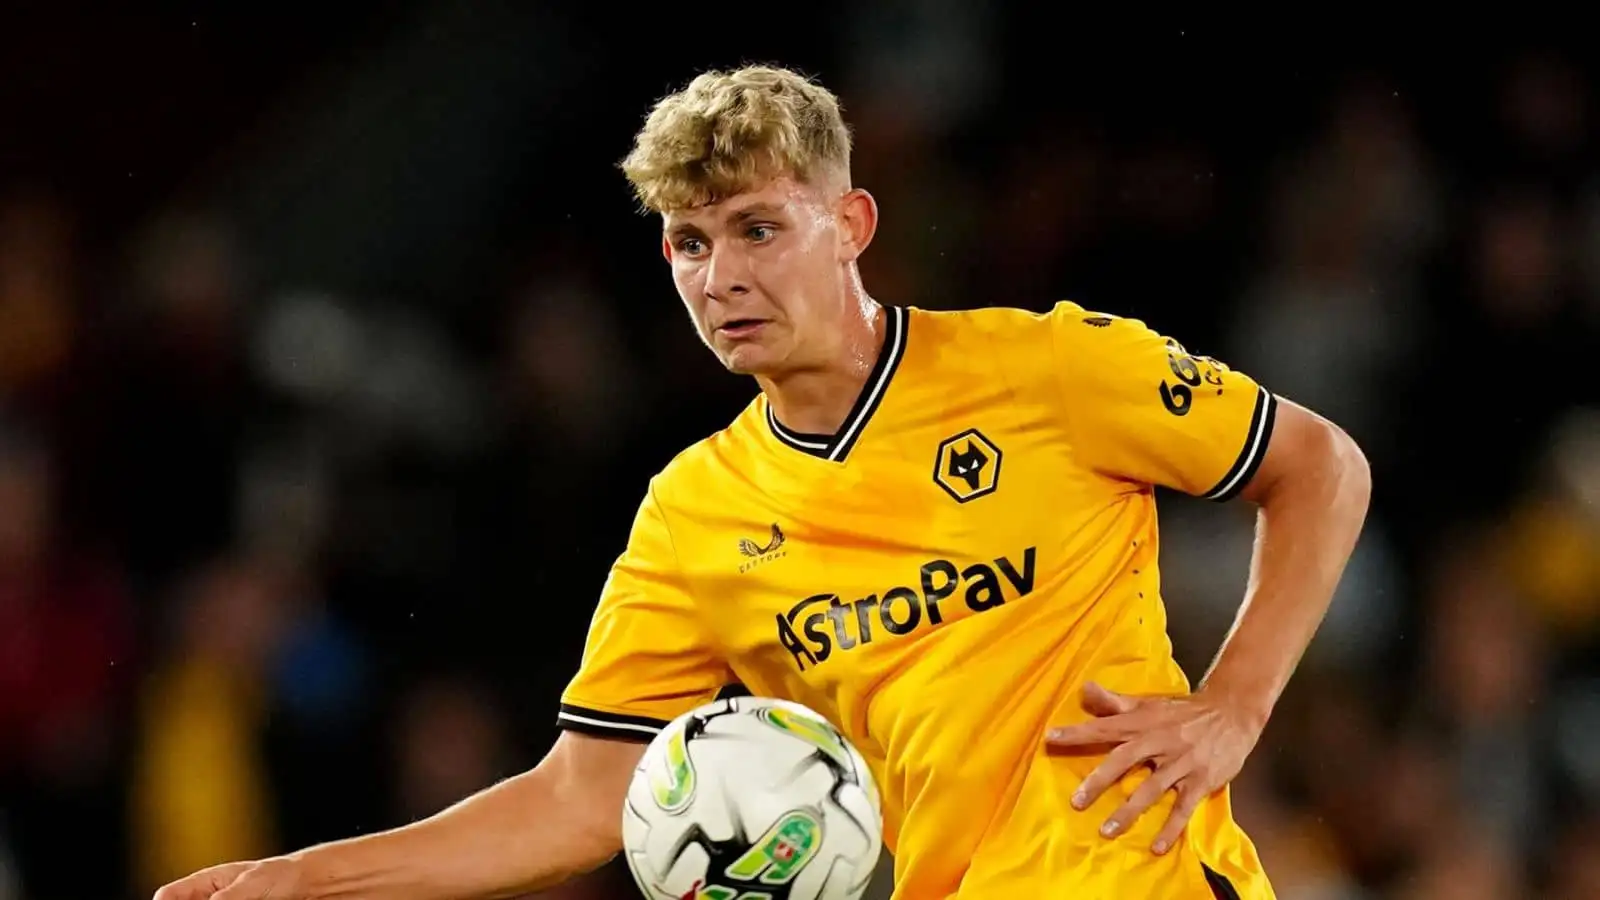 Wolverhampton Wanderers’ Alfie Pond in action during the Carabao Cup second round match at the Molineux Stadium, Wolverhampton